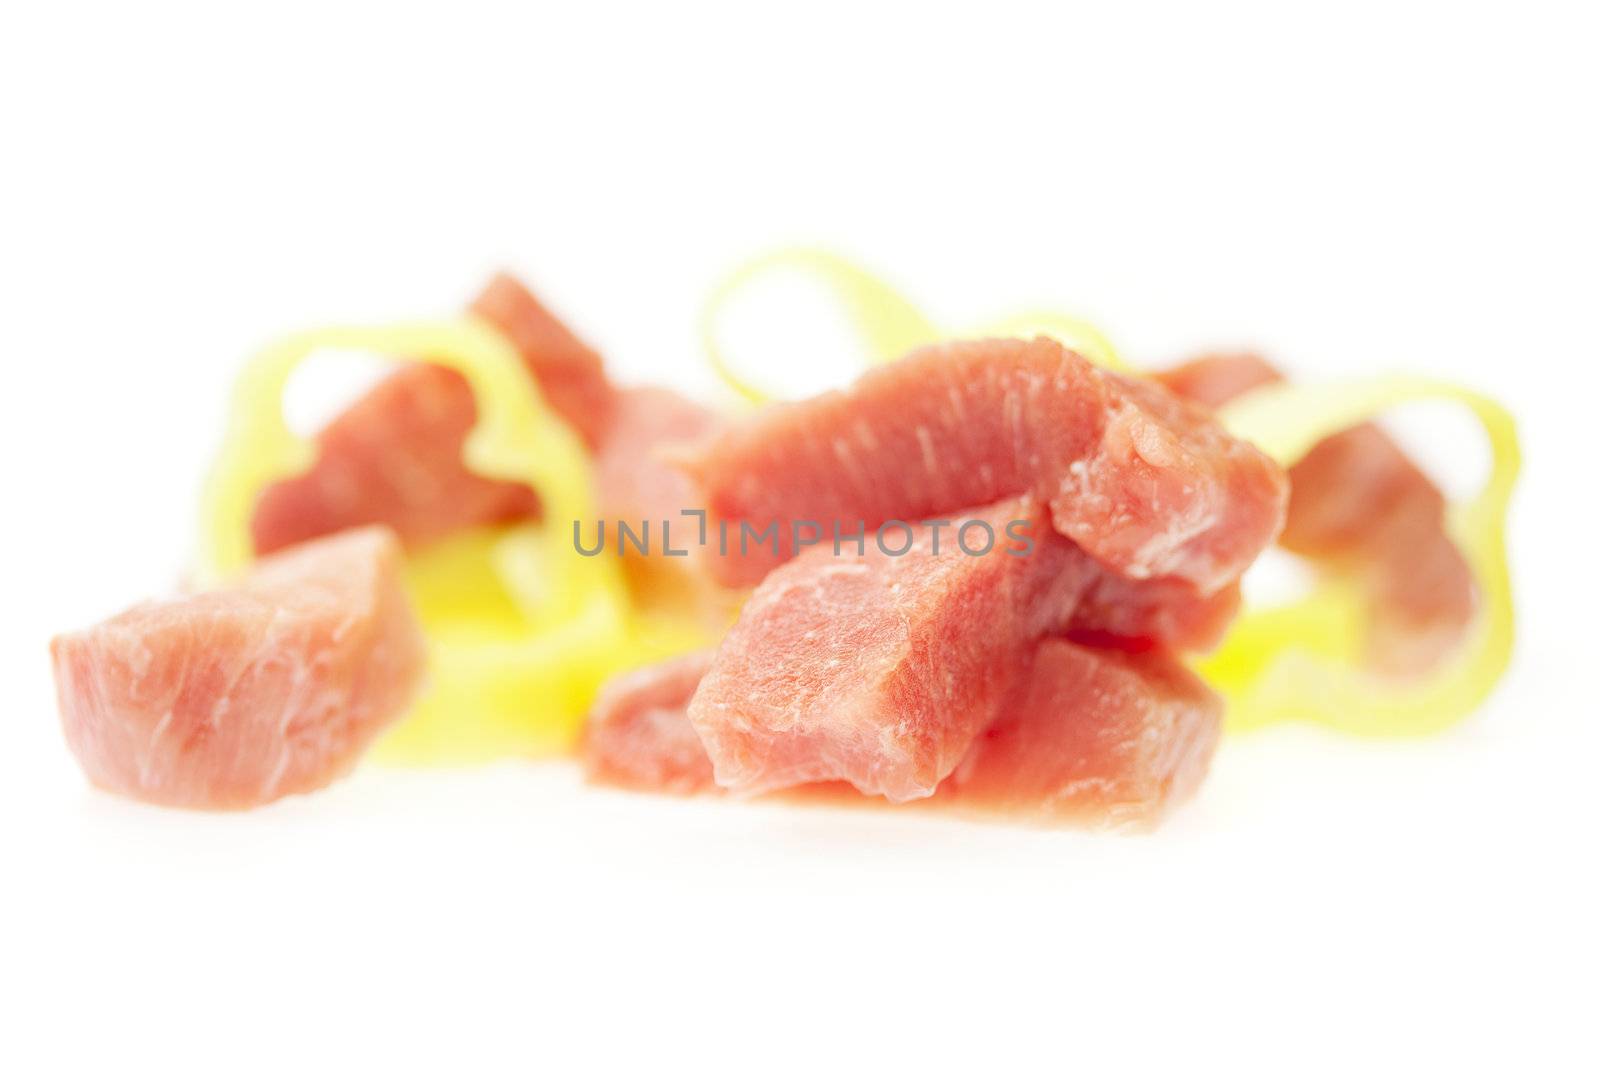 chunks of fresh meat and pepper isolated on white